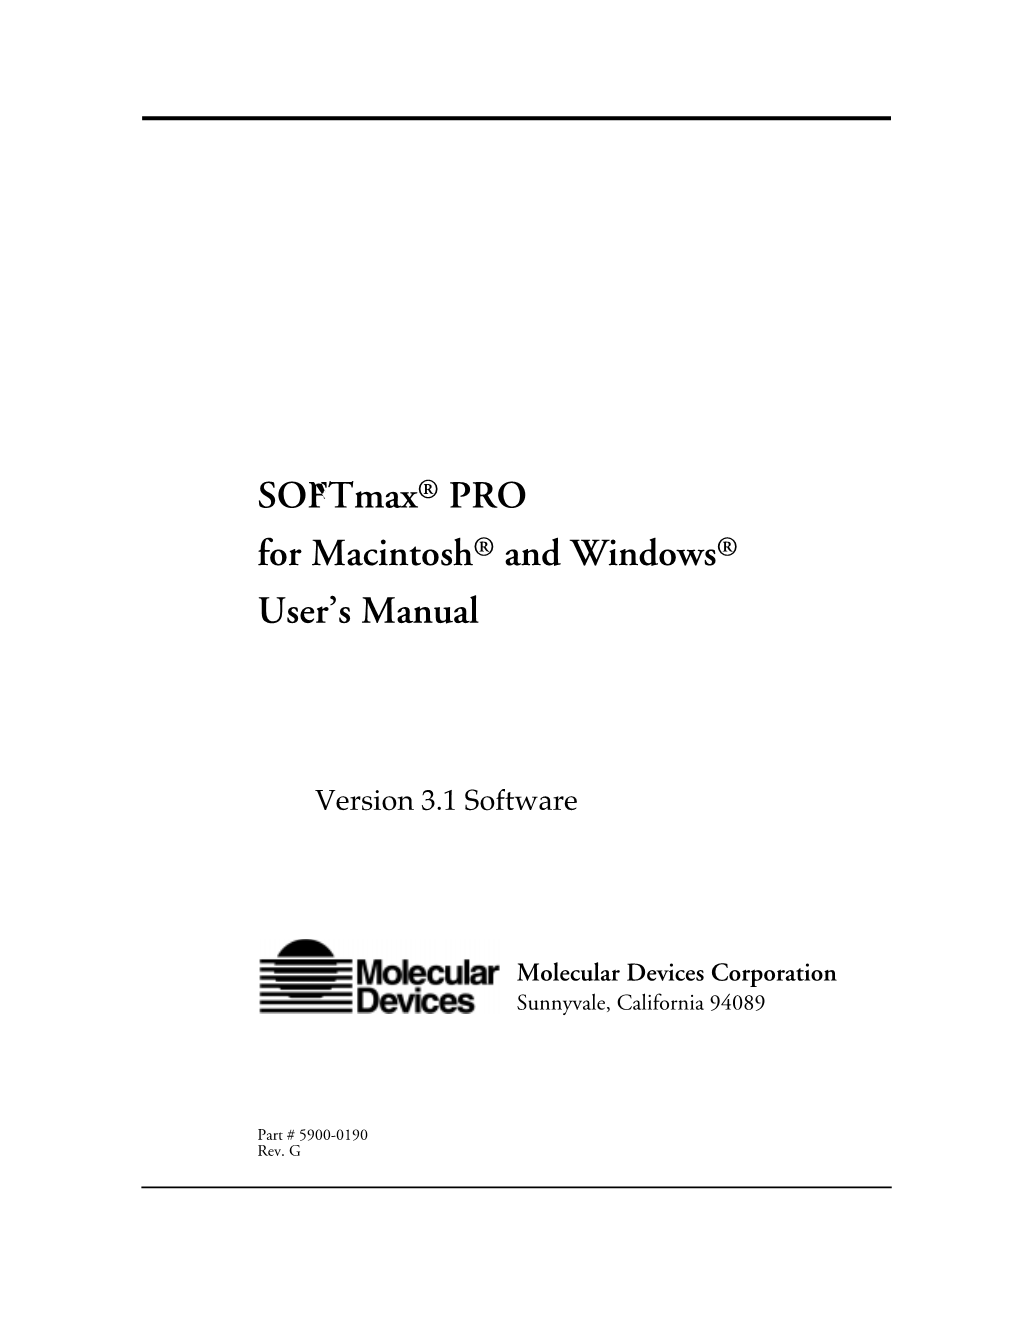 Softmax® PRO for Macintosh® and Windows® User's Manual